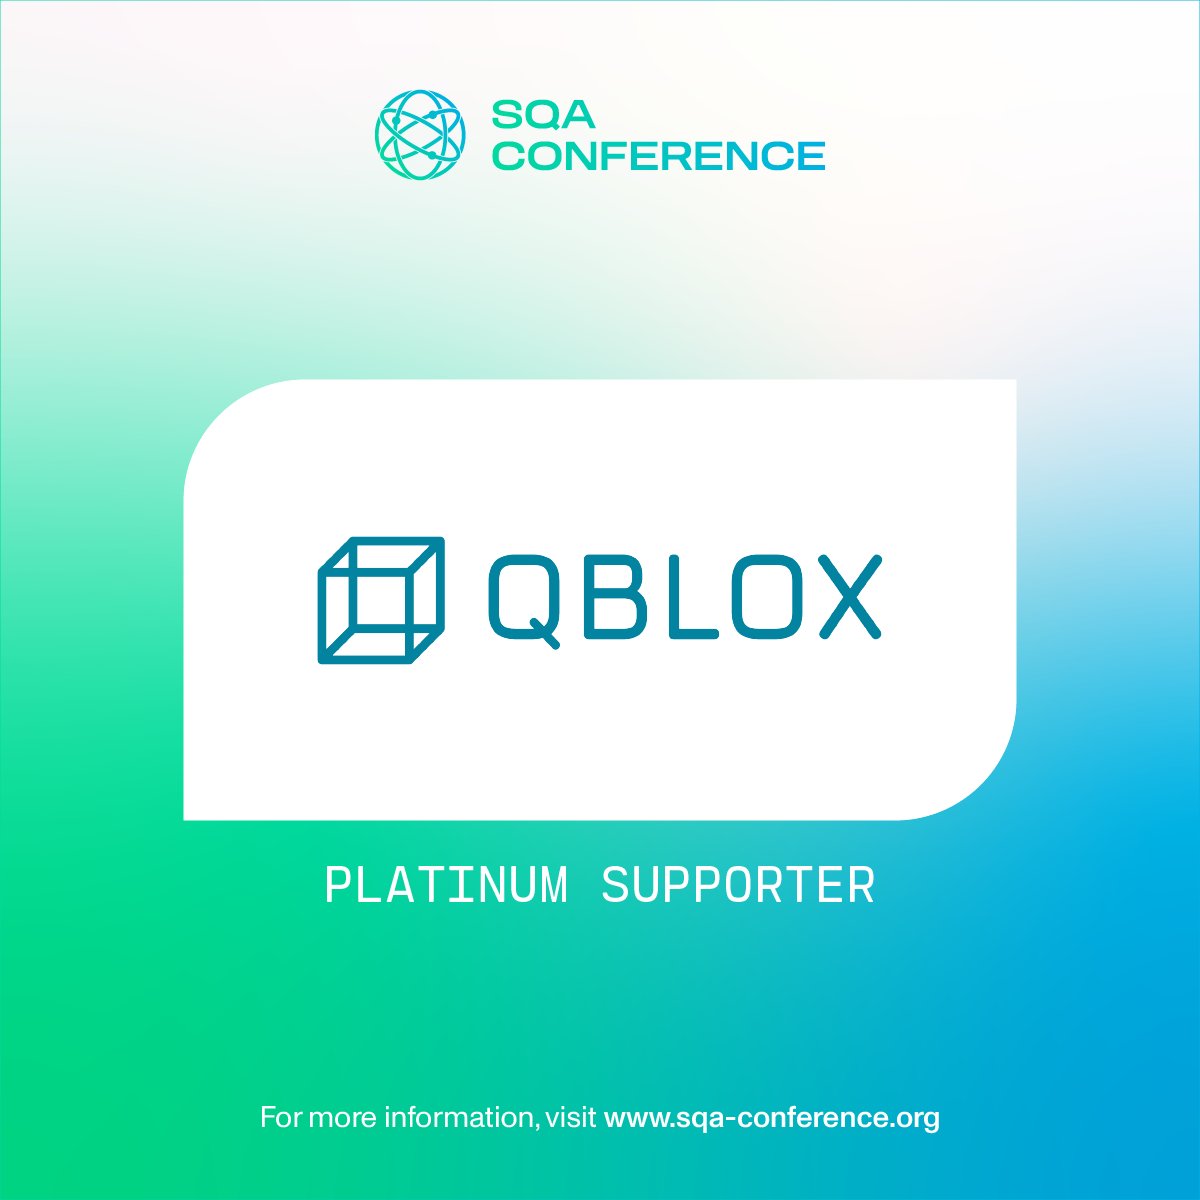 We are pleased to announce that #Qblox is an official Platinum Supporter of the Superconducting Qubits and Algorithms (SQA) Conference, which will be held in Helsinki, Finland this summer.

Learn more about Qblox here: https://t.co/w8z4uKa3lU

#SQAConf2022 #SQAConference https://t.co/P1B5ap5eeI